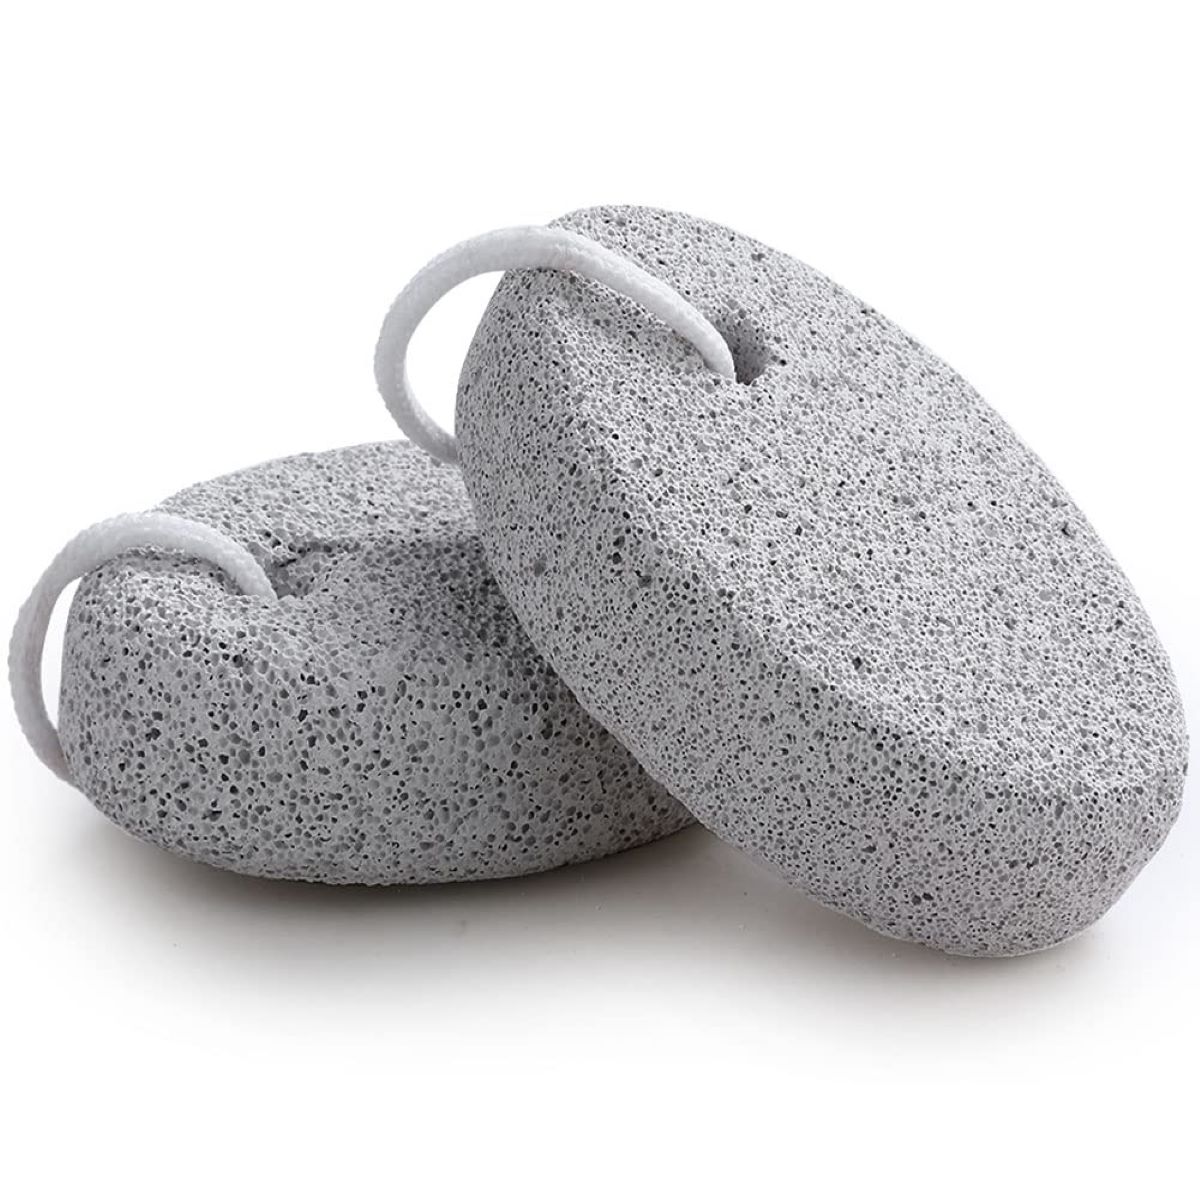 How To Store Pumice Stone